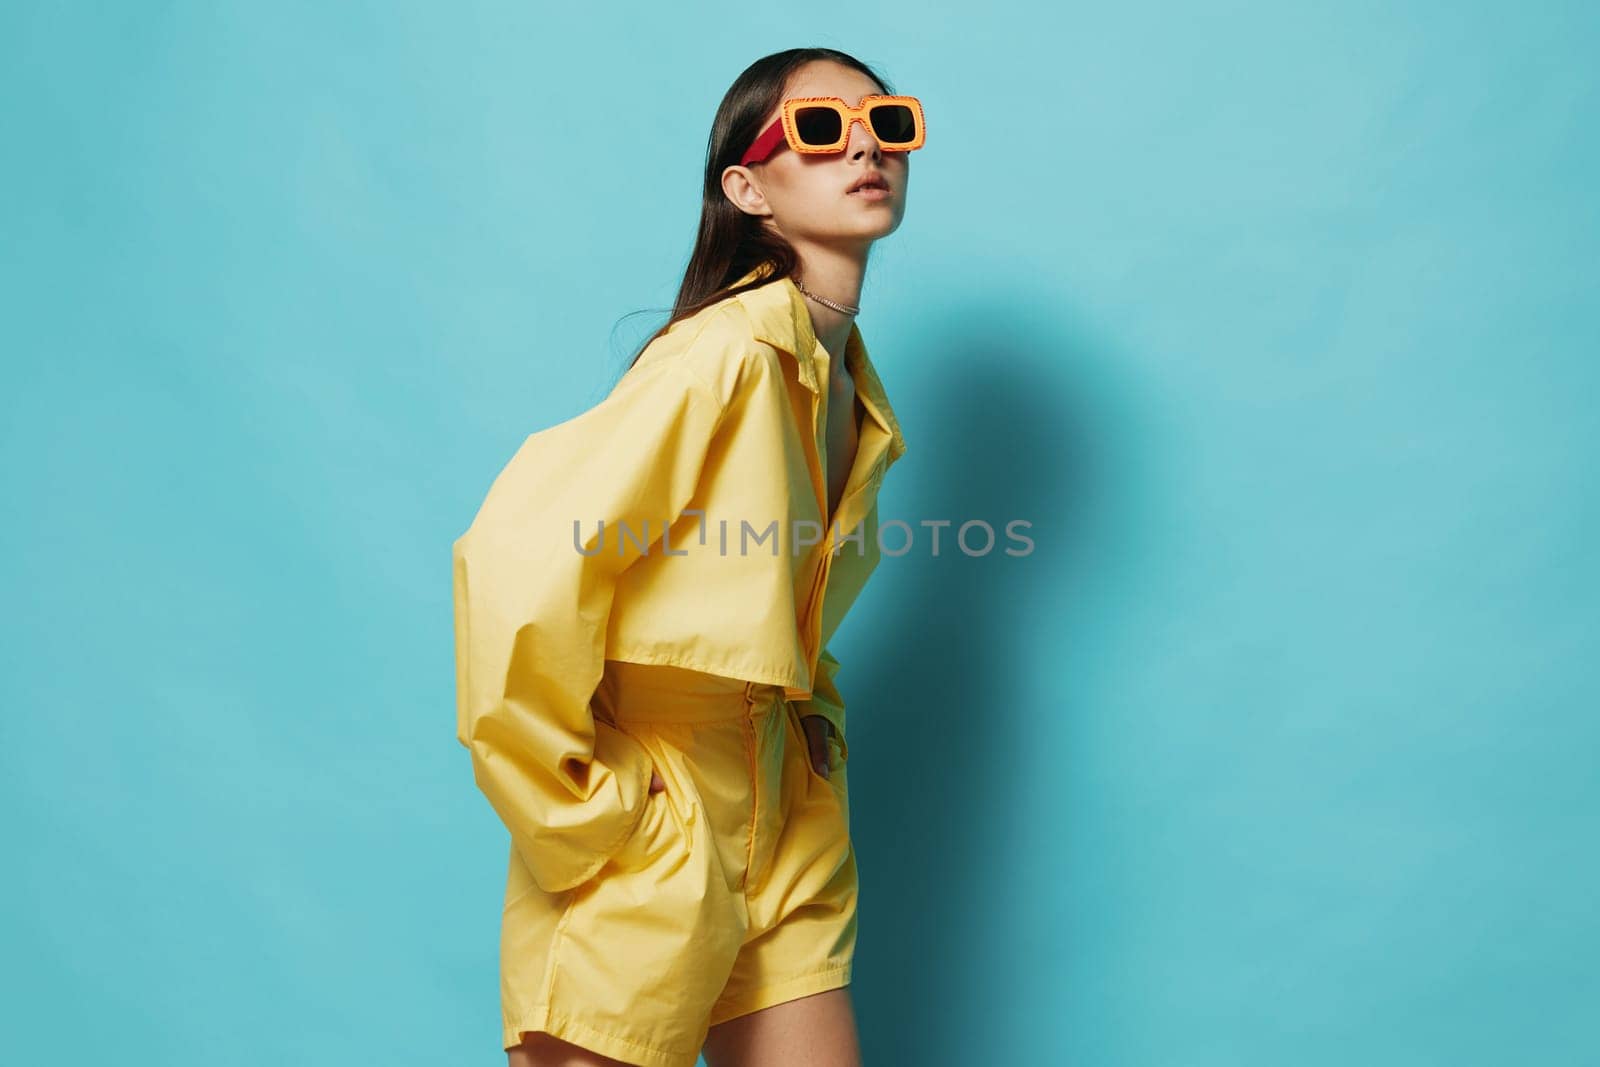 blue: woman hairstyle background beautiful funny trendy sunglasses fashion yellow attractive young stylish expression brunette lifestyle girl lady beauty romance outfit pretty